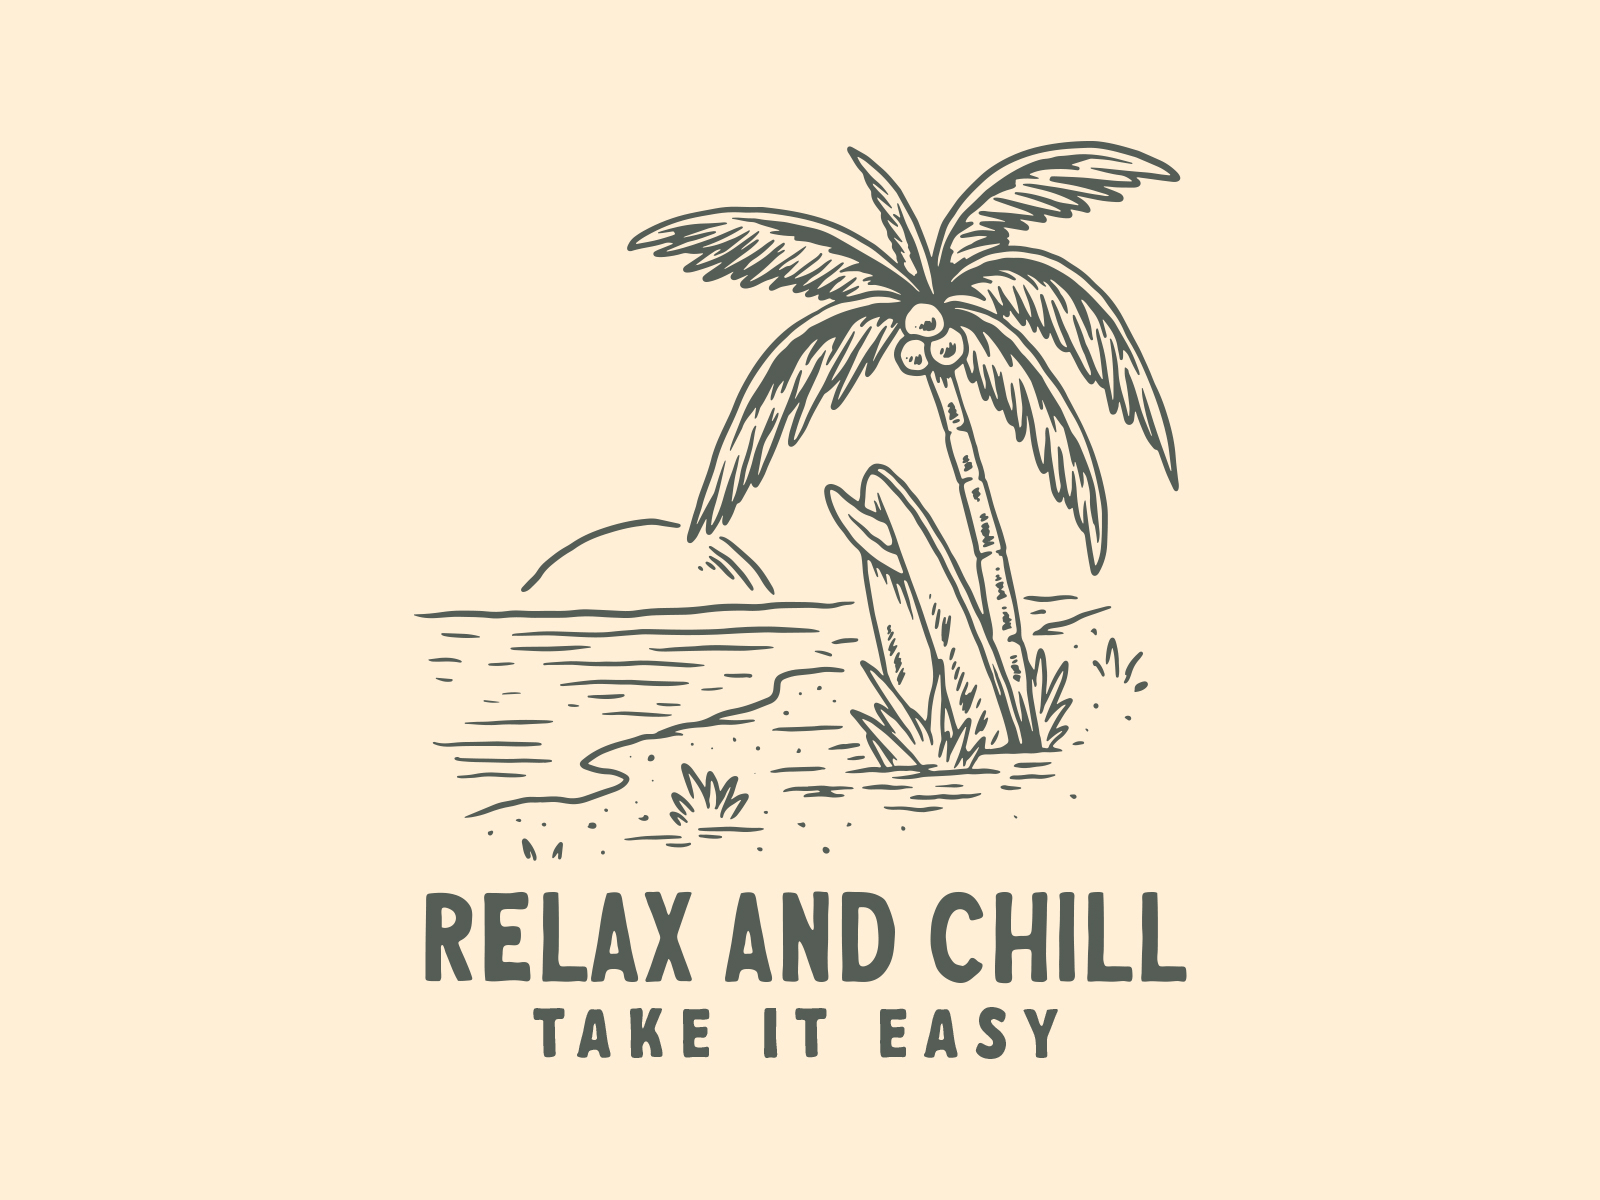 Relax Chill by Ironbird Creative on Dribbble